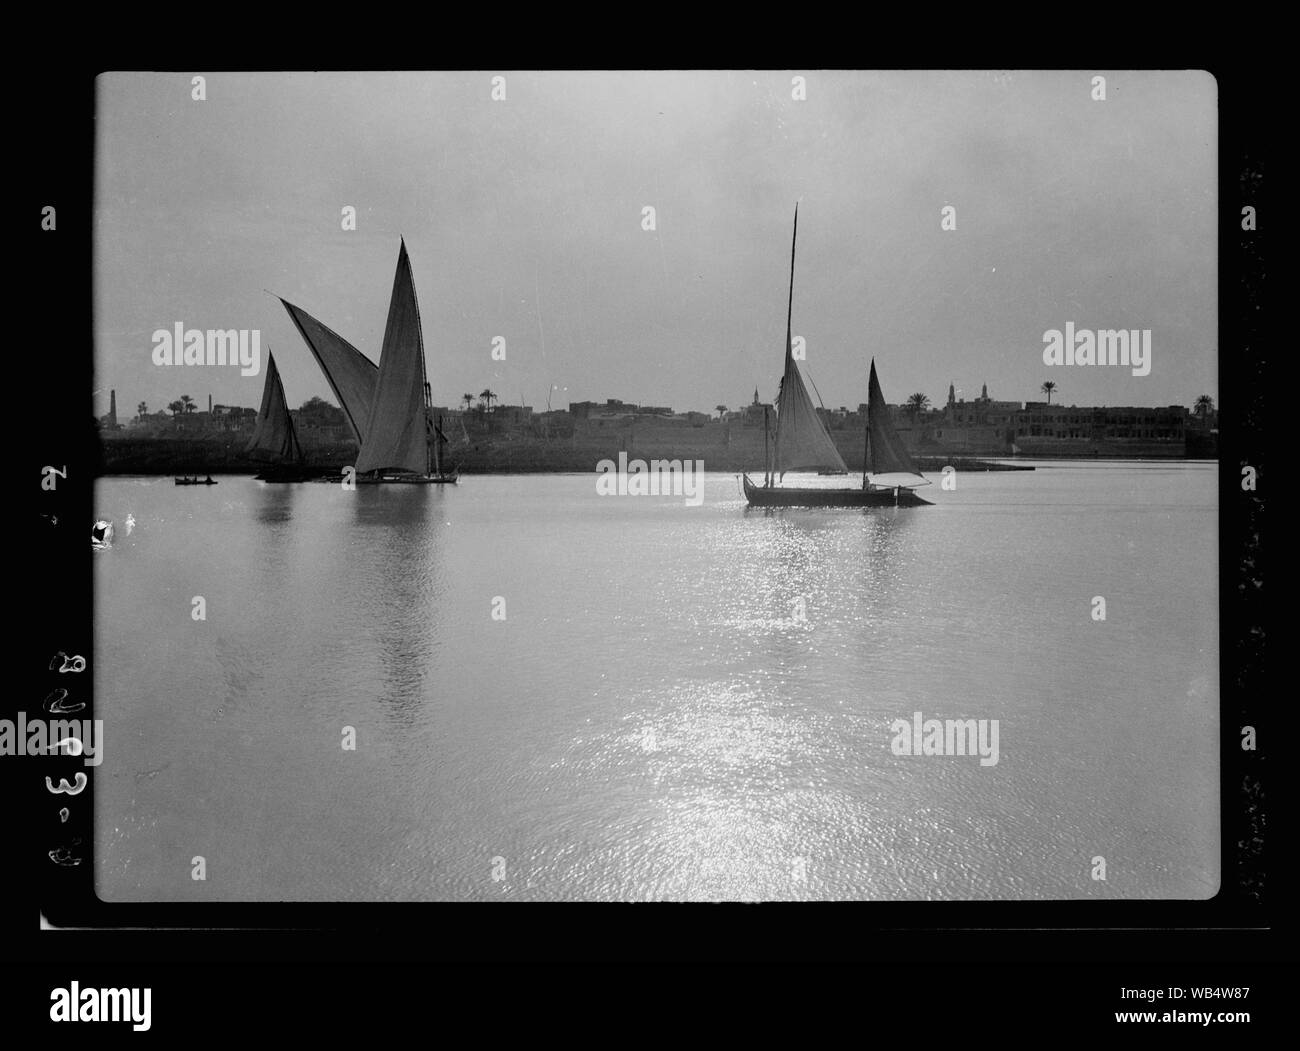 Egypt. River scenes. The Nile. Scenes along the Cairo banks Abstract/medium: G. Eric and Edith Matson Photograph Collection Stock Photo